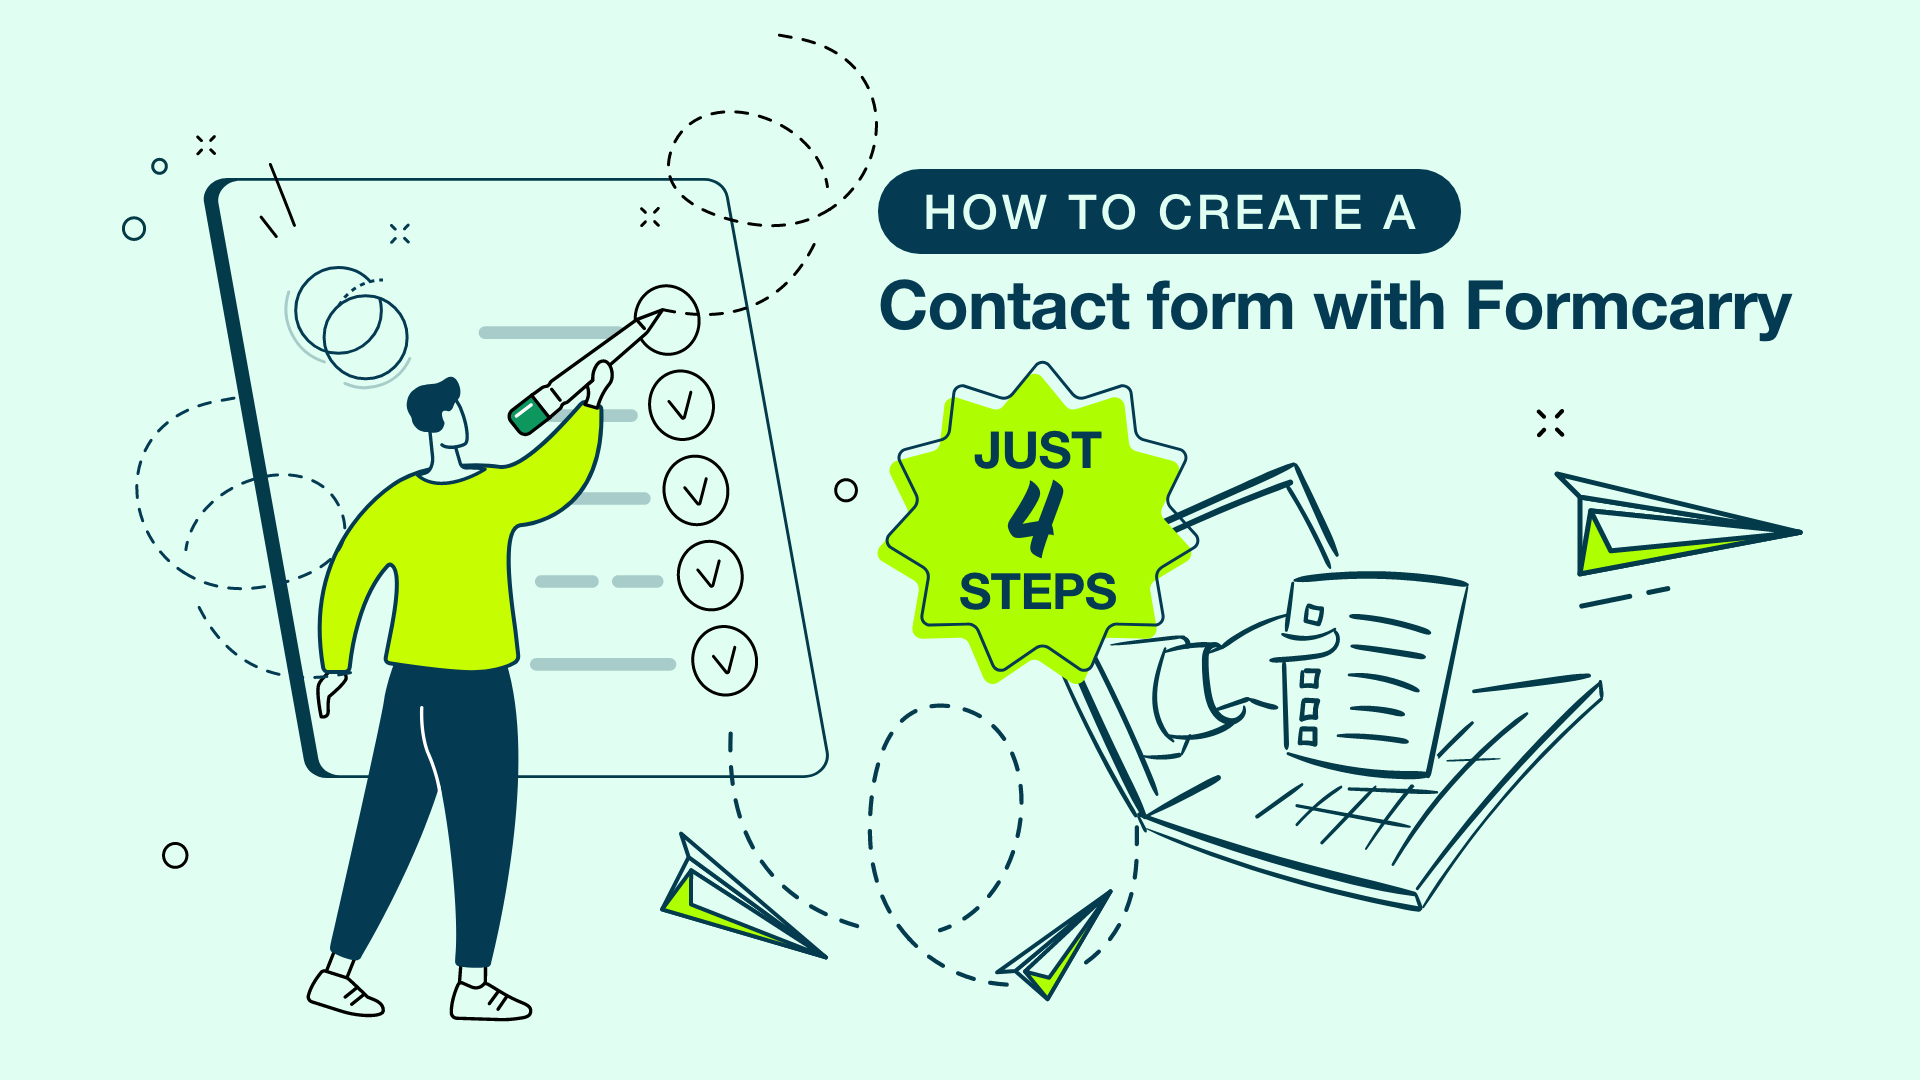 Contact Page screen design idea #50: How to create a contact form and collect submissions in 4 steps